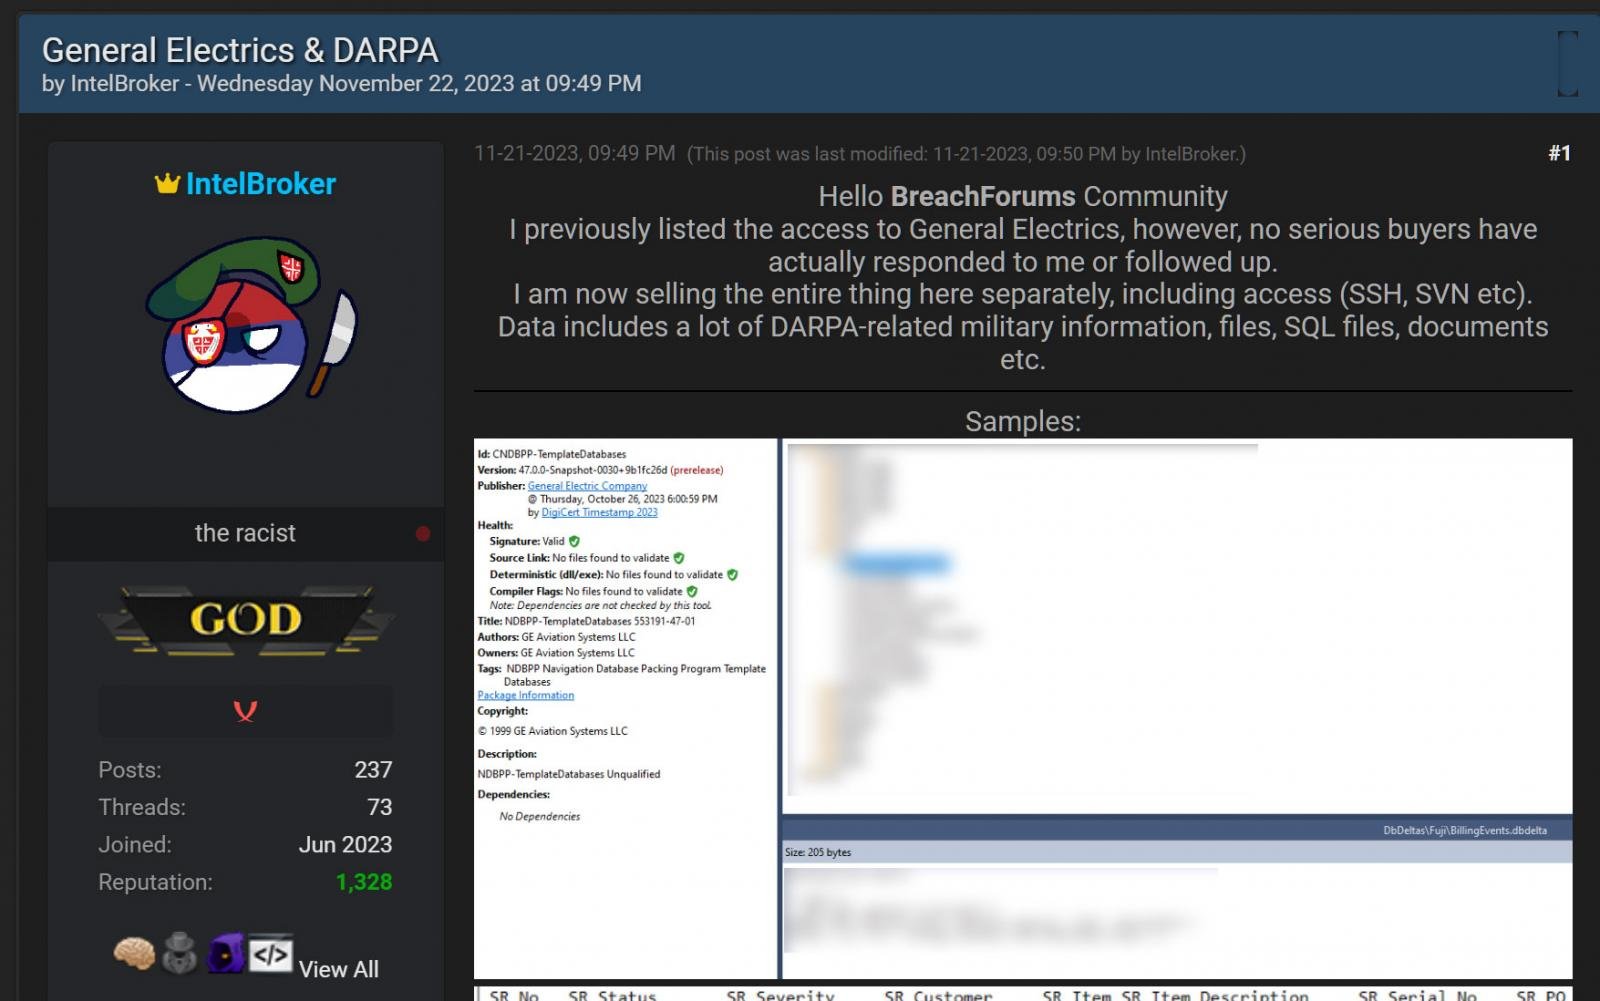 IntelBroker selling alleged GE data and acess on a hacking forum